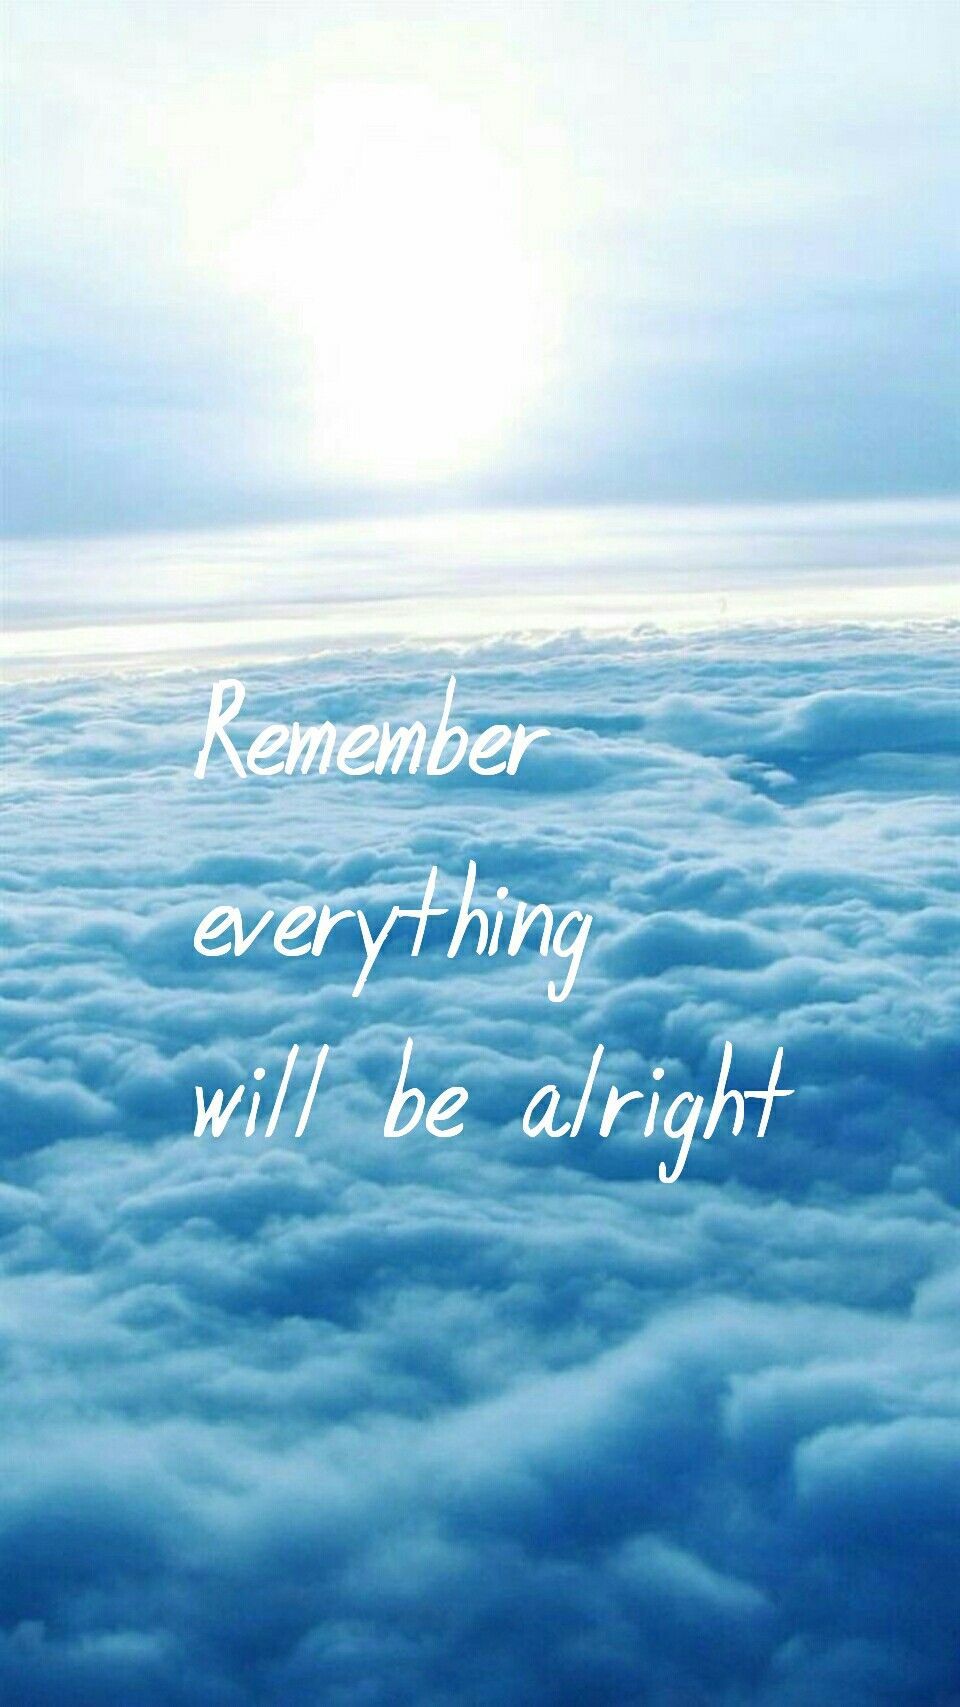 Remember everything will be alright. Inspirational quotes wallpaper, Wallpaper quotes, Quote background